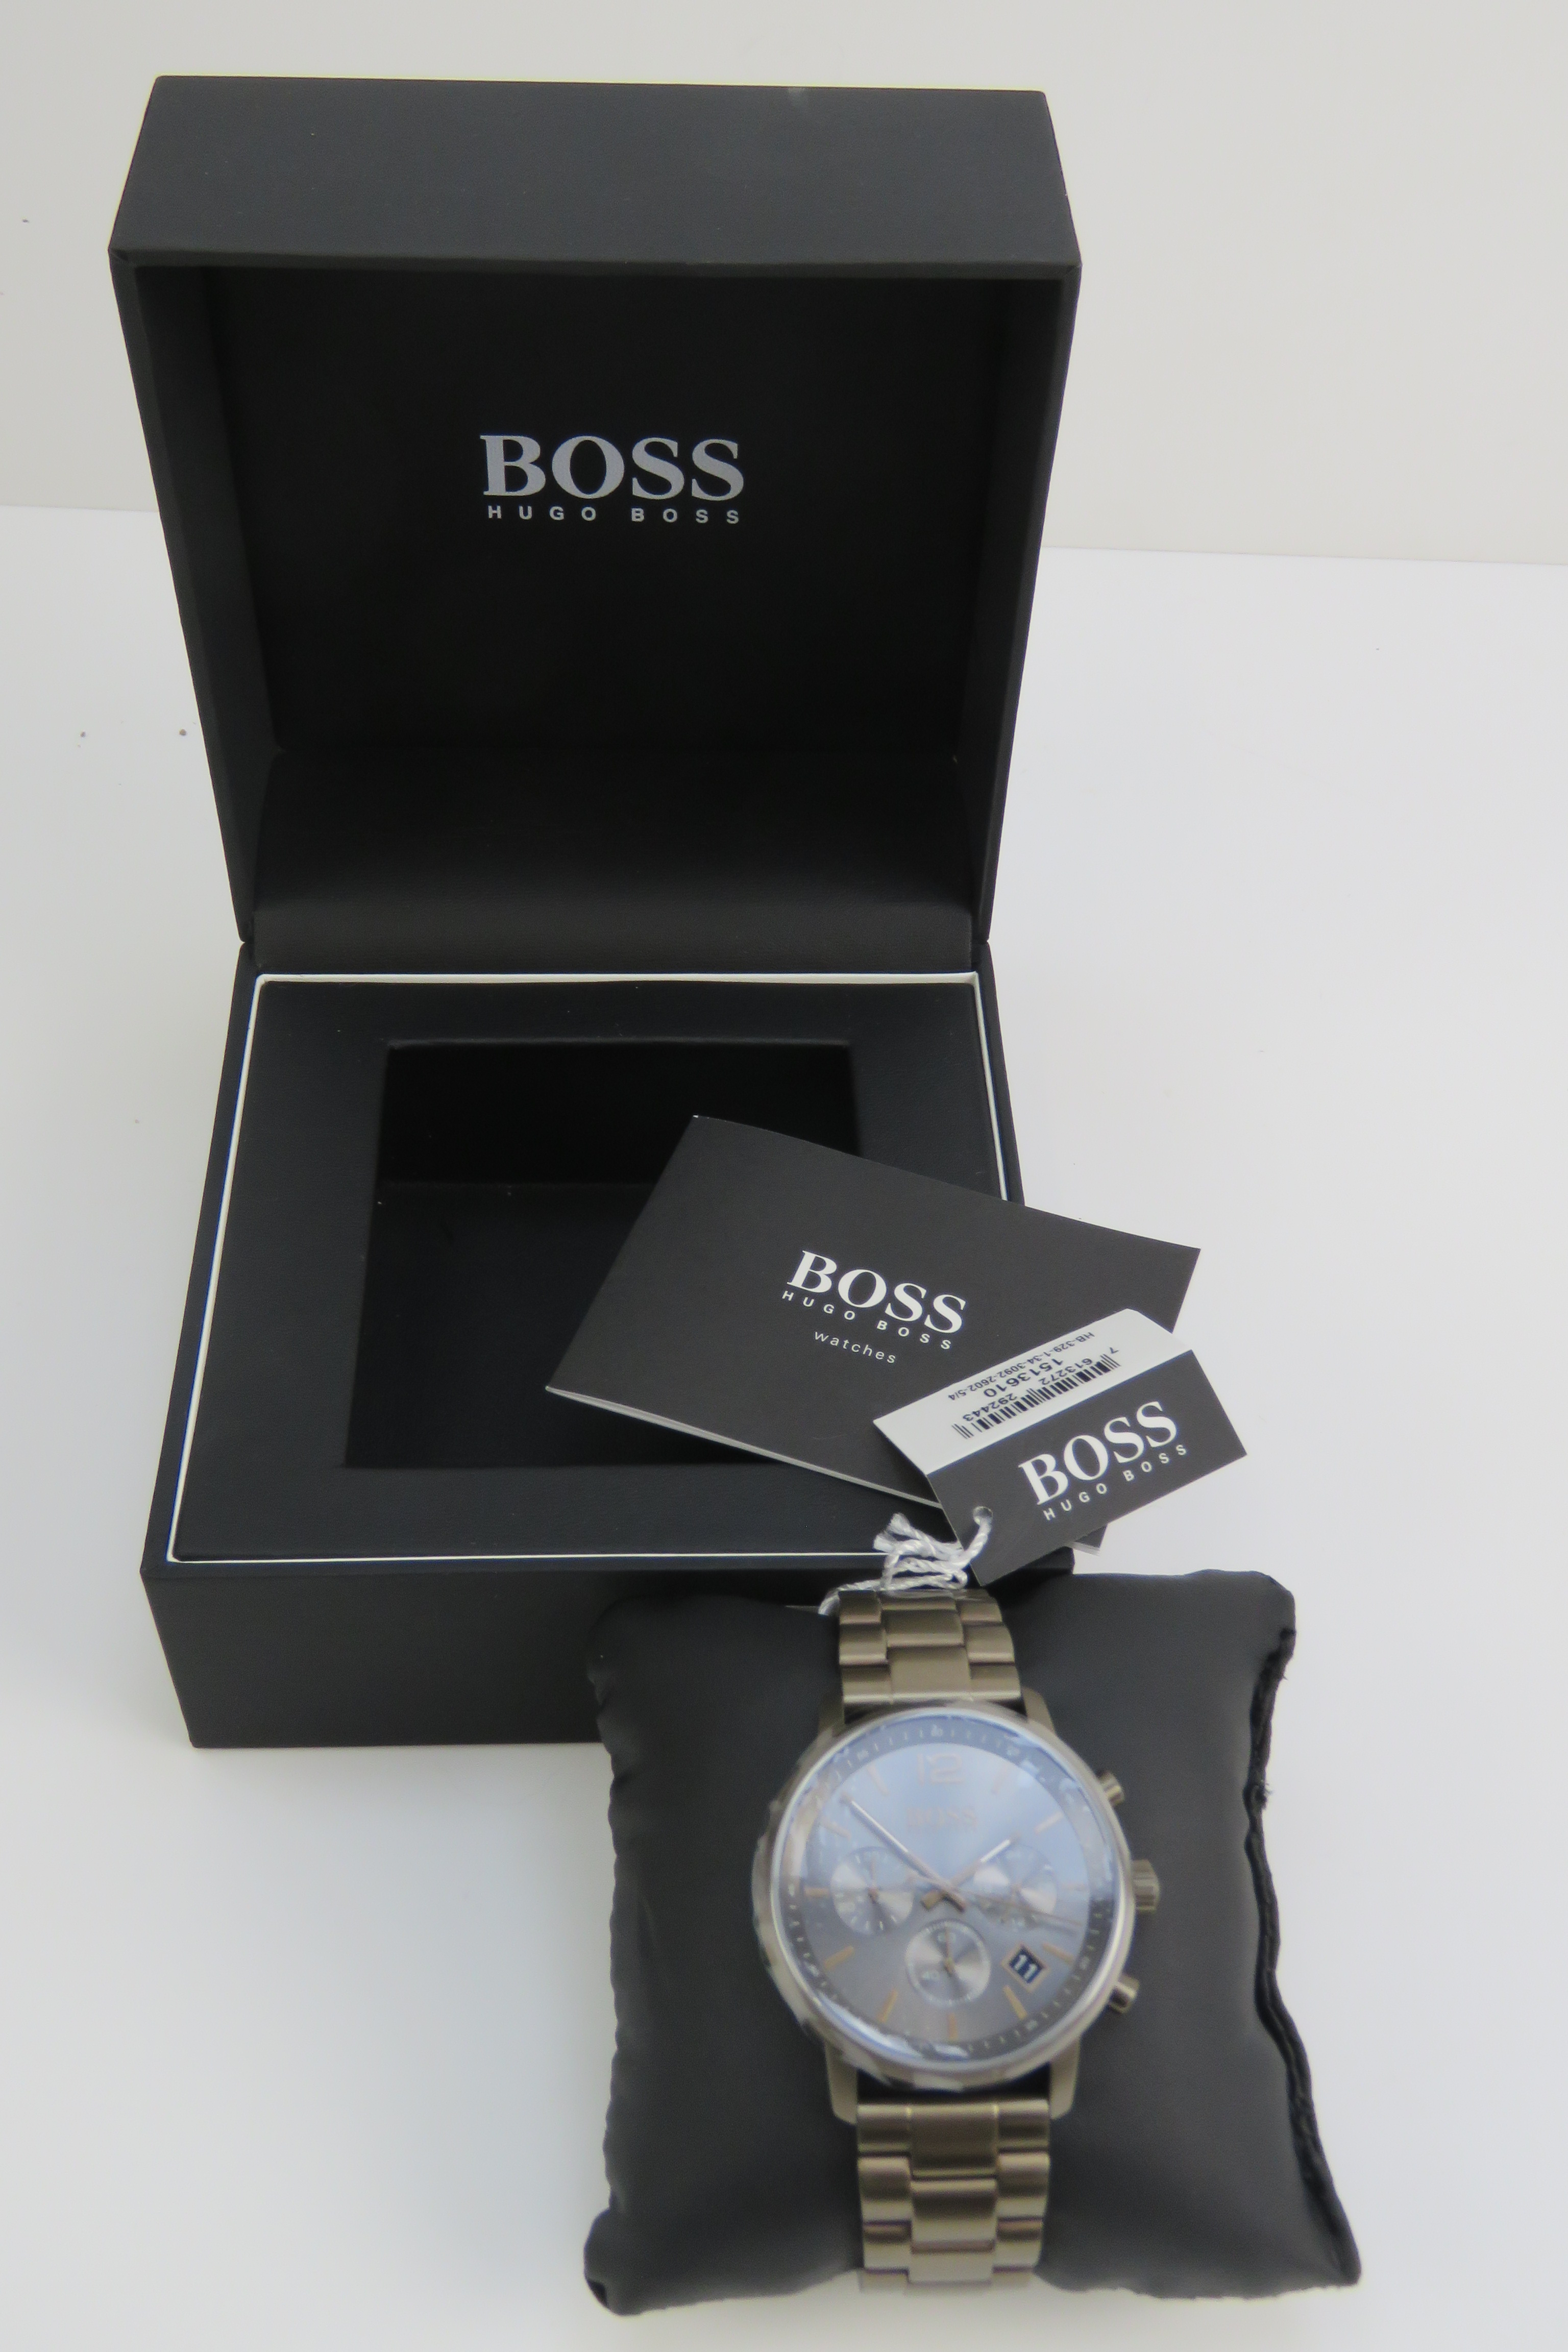 A Hugo Boss stainless steel wristwatch in as new unworn condition complete with box and papers, - Image 9 of 9